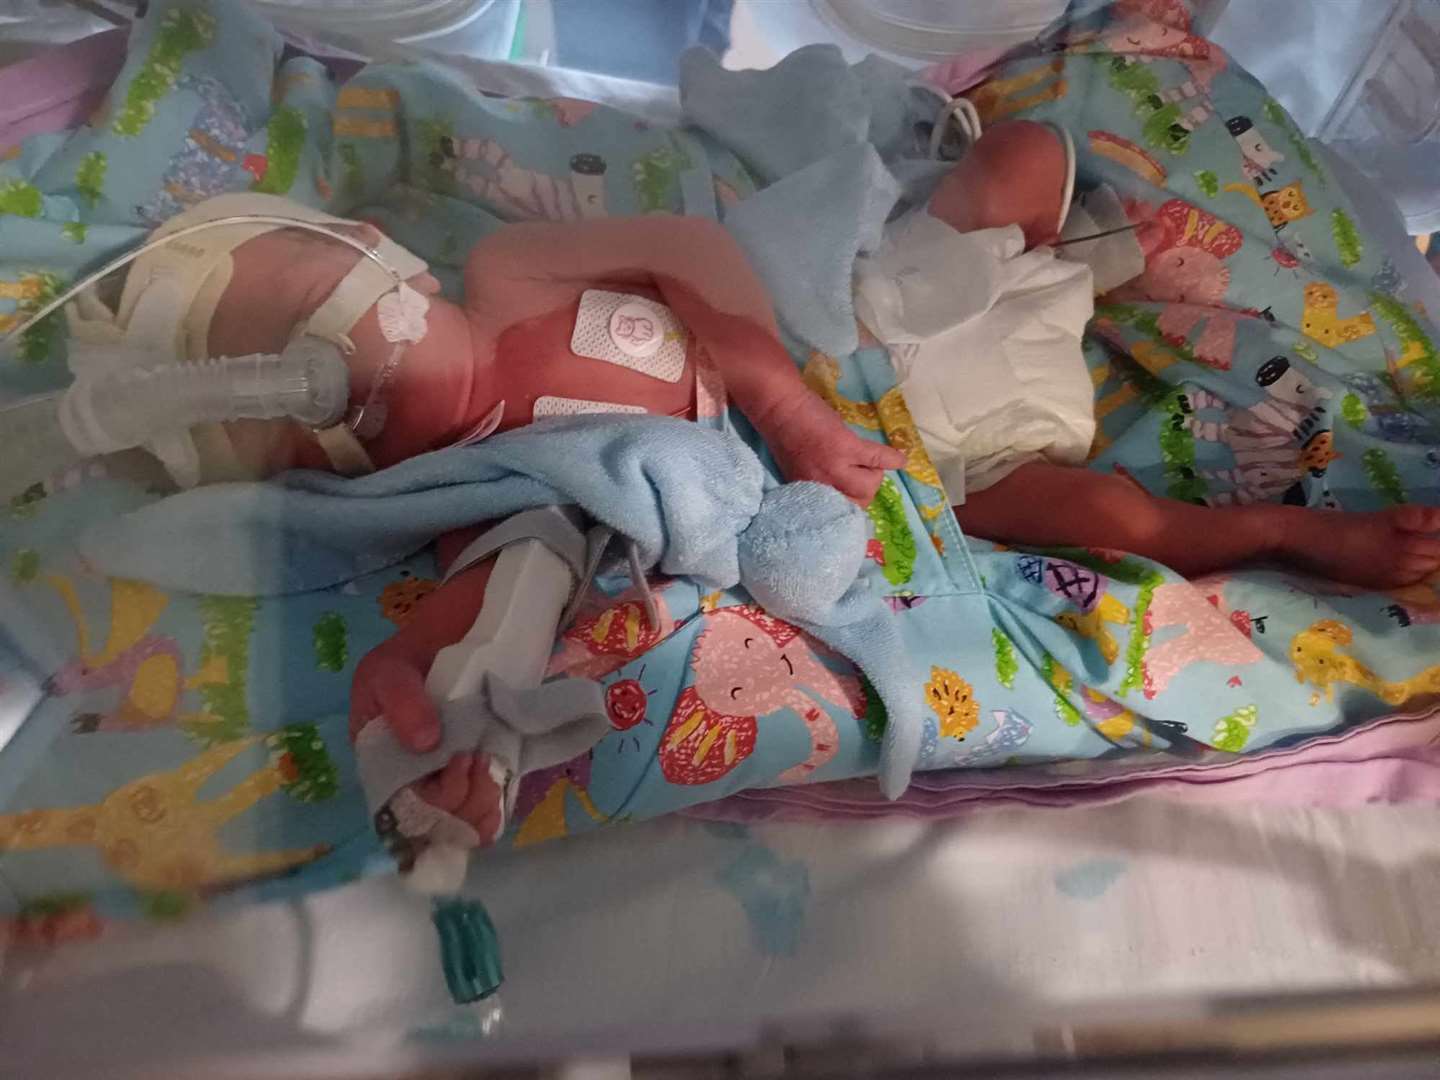 The twins first day in their incubators and on the CPAP (continuous positive airway pressure) machine.